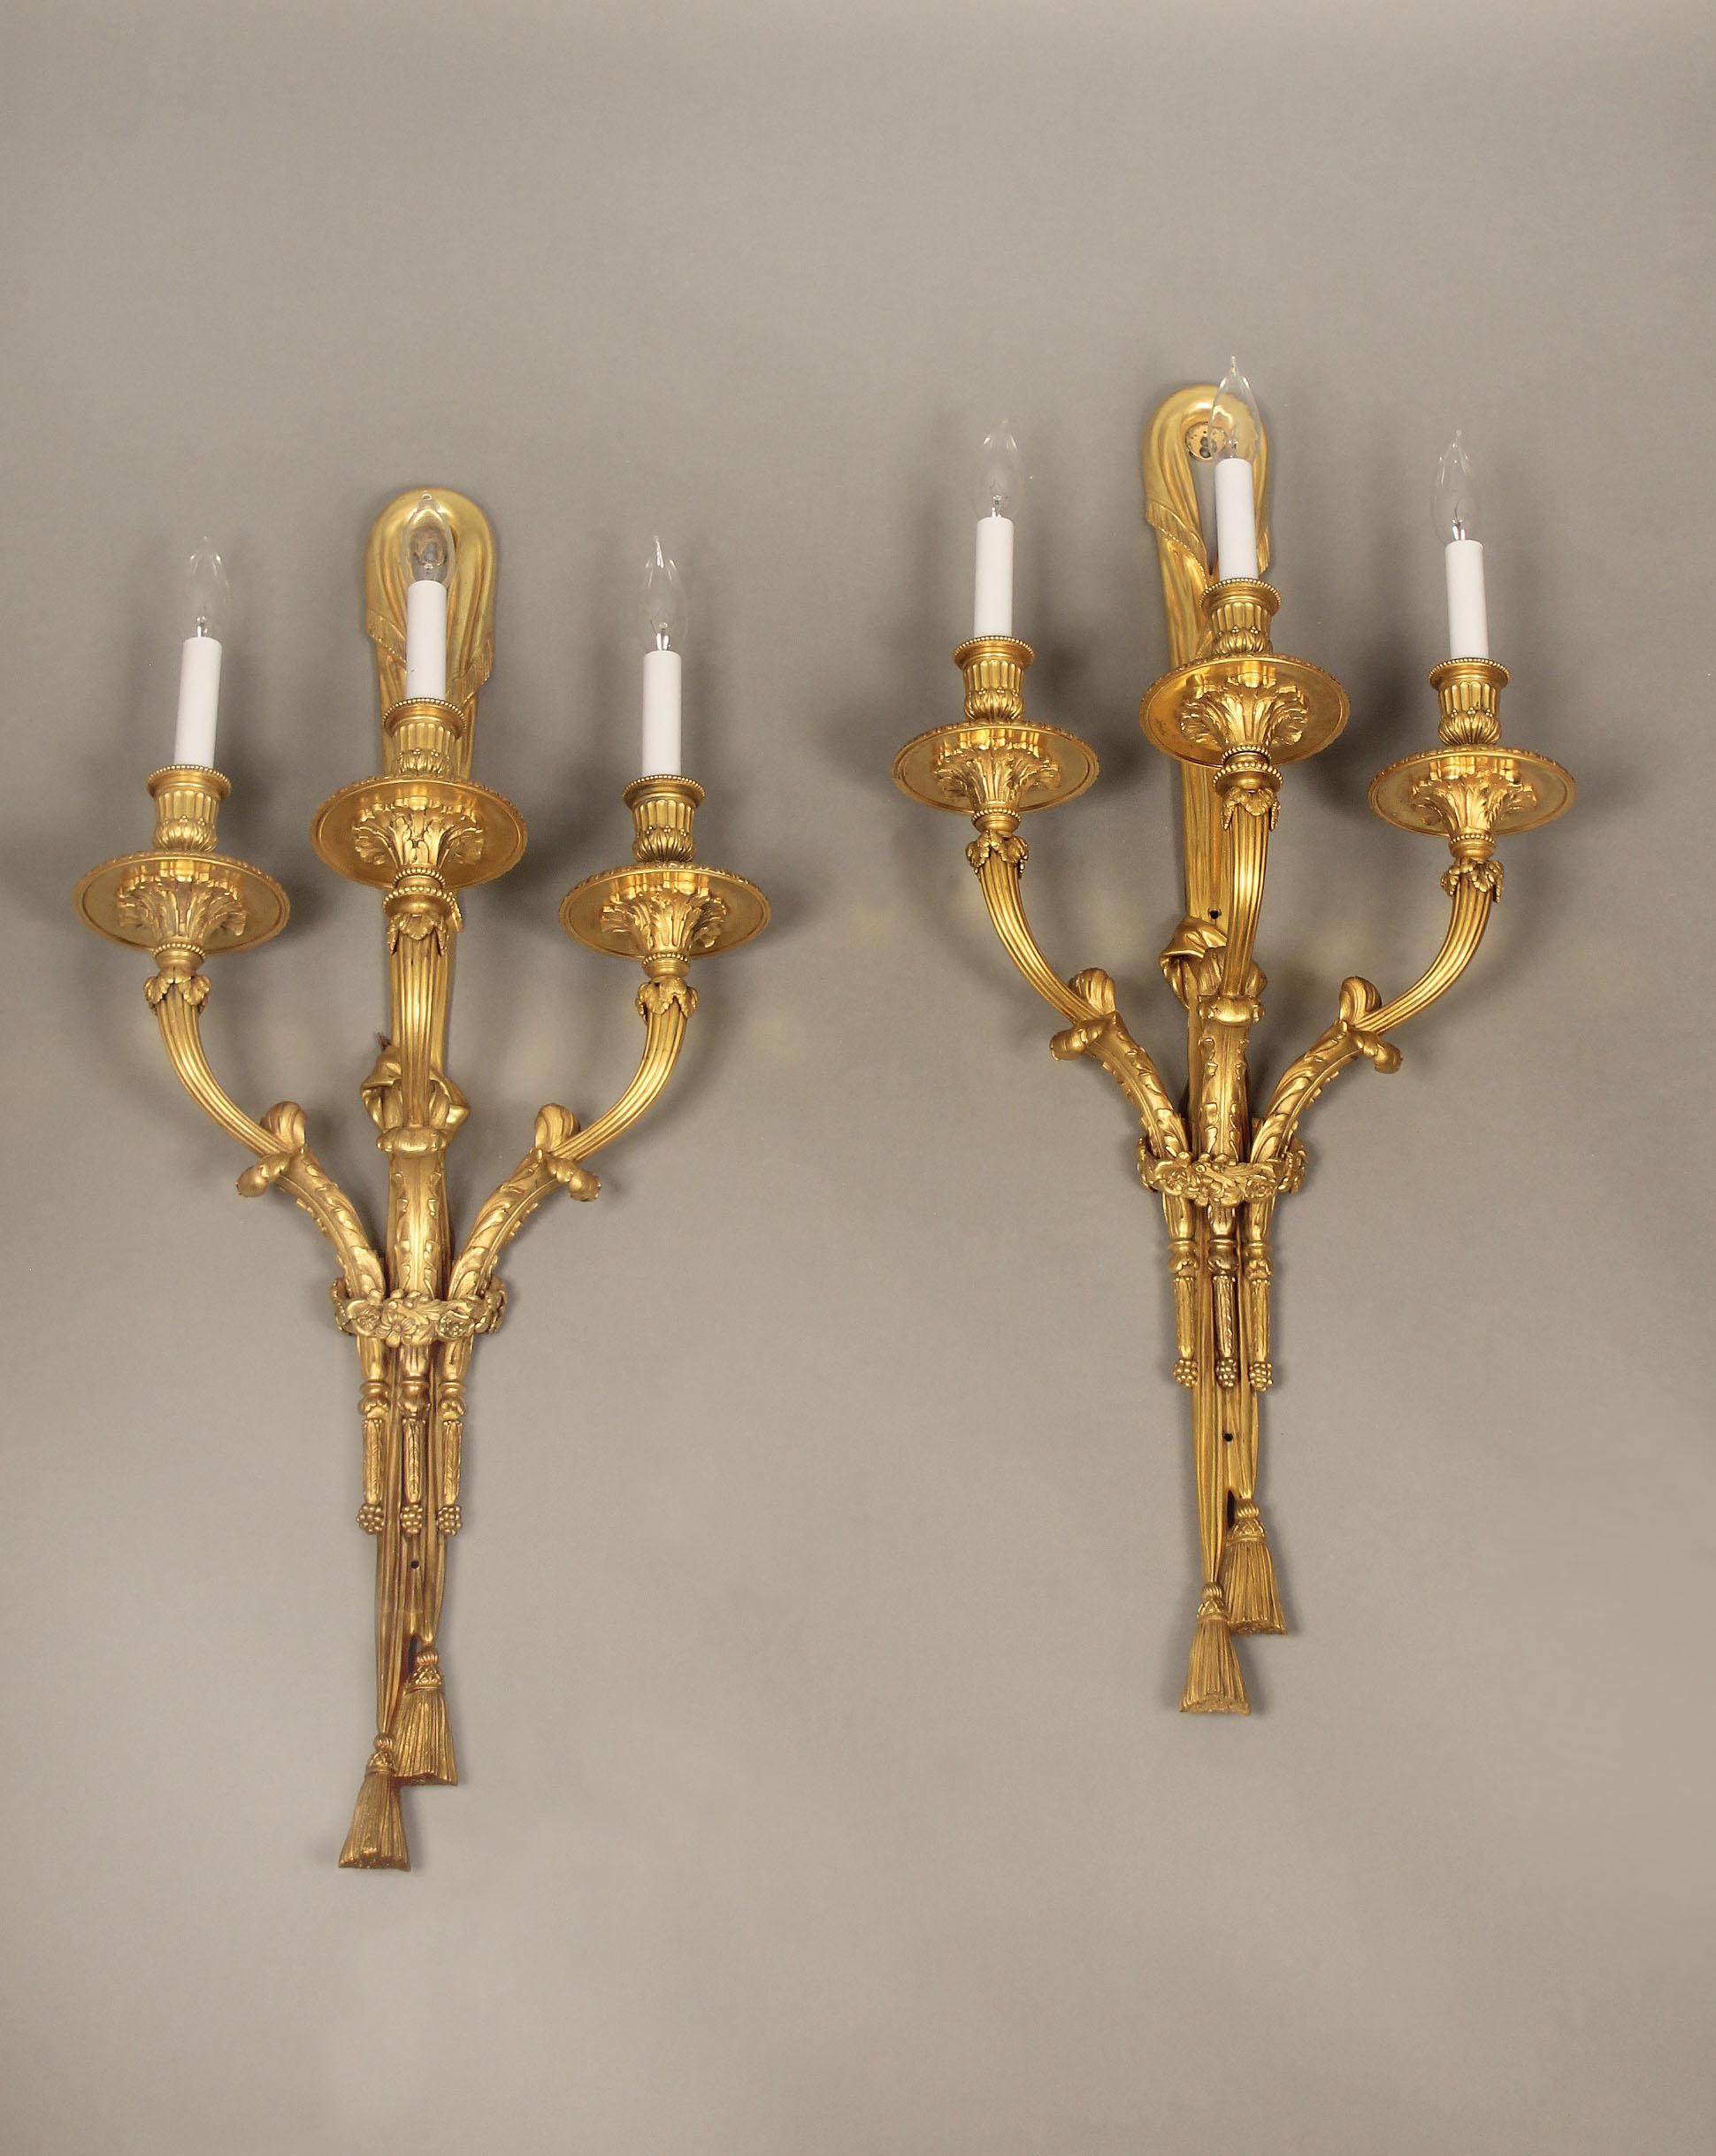 An excellent pair of early 20th century gilt bronze three-light sconces.

By Caldwell

A ribbon back above a body and three arms with floral and foliage designs.

Stamped C on the back of each sconce.

Edward F. Caldwell & Co., of New York